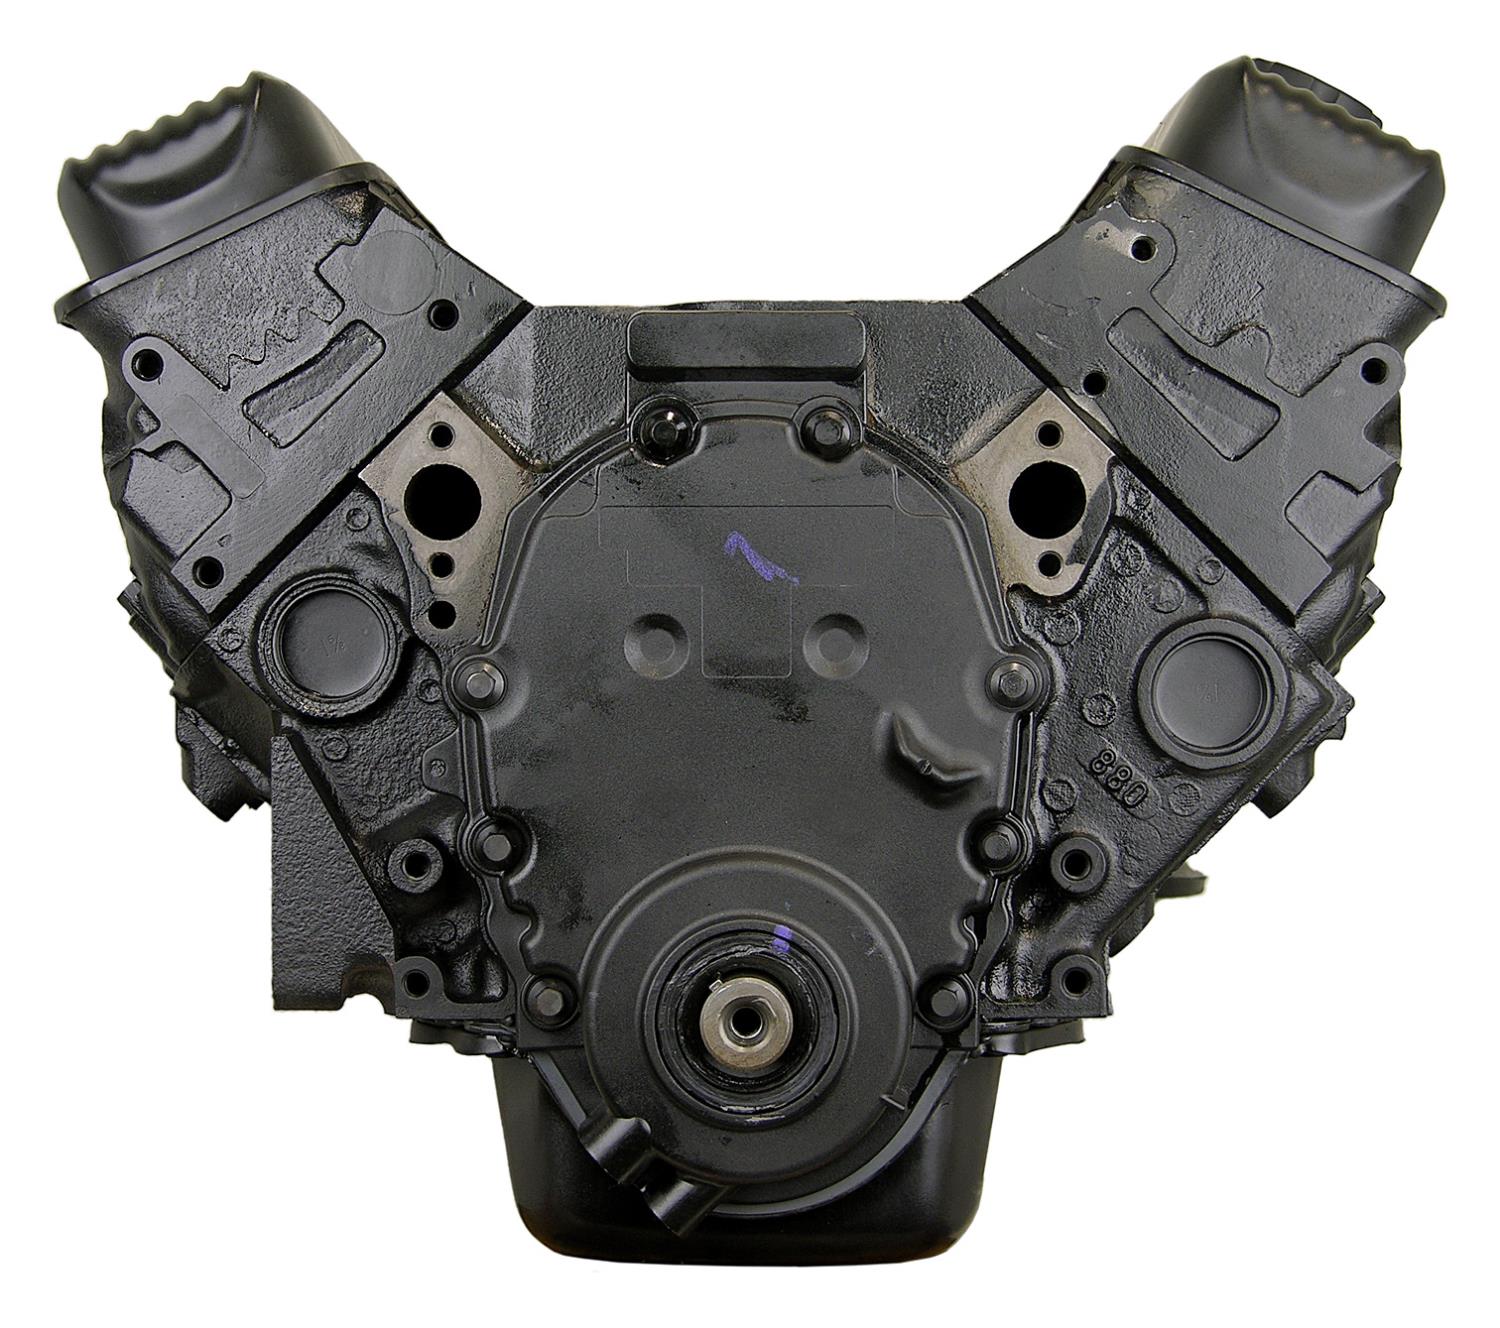 VMH4 Remanufactured Crate Engine for Marine Applications with 1996-2005 Small Block Chevy 350ci/5.7L